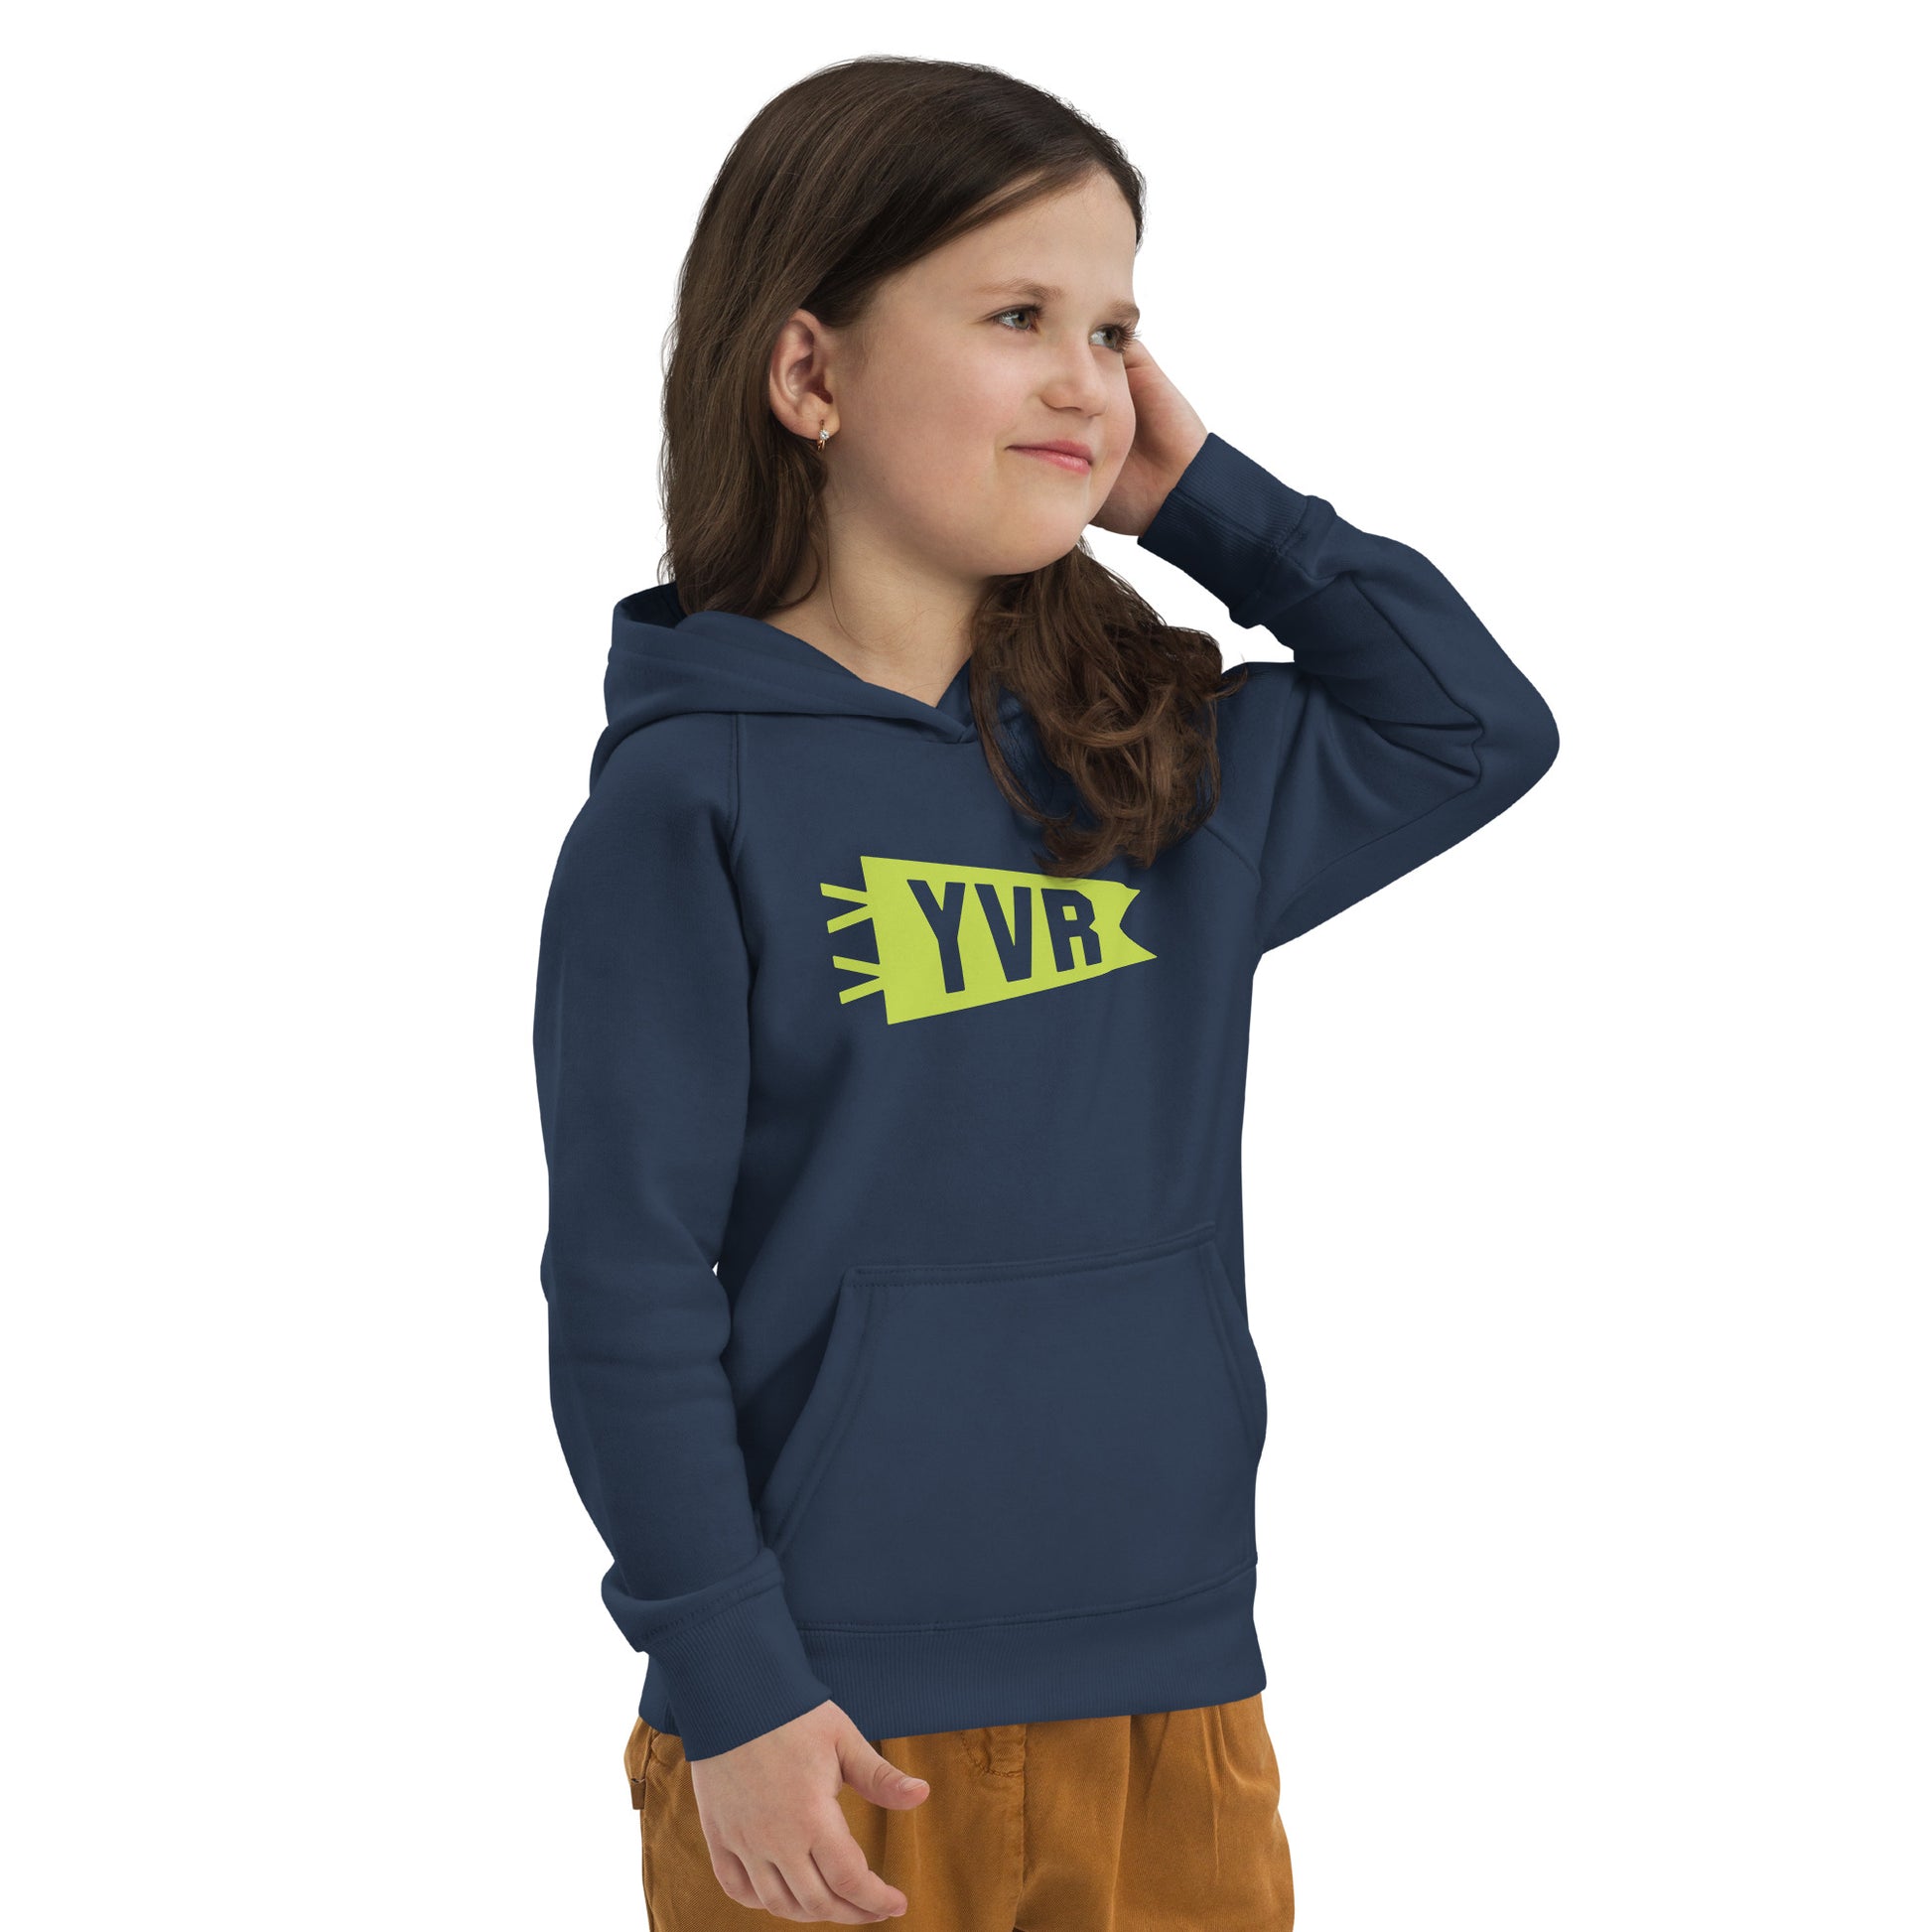 Kid's Sustainable Hoodie - Green Graphic • YVR Vancouver • YHM Designs - Image 06